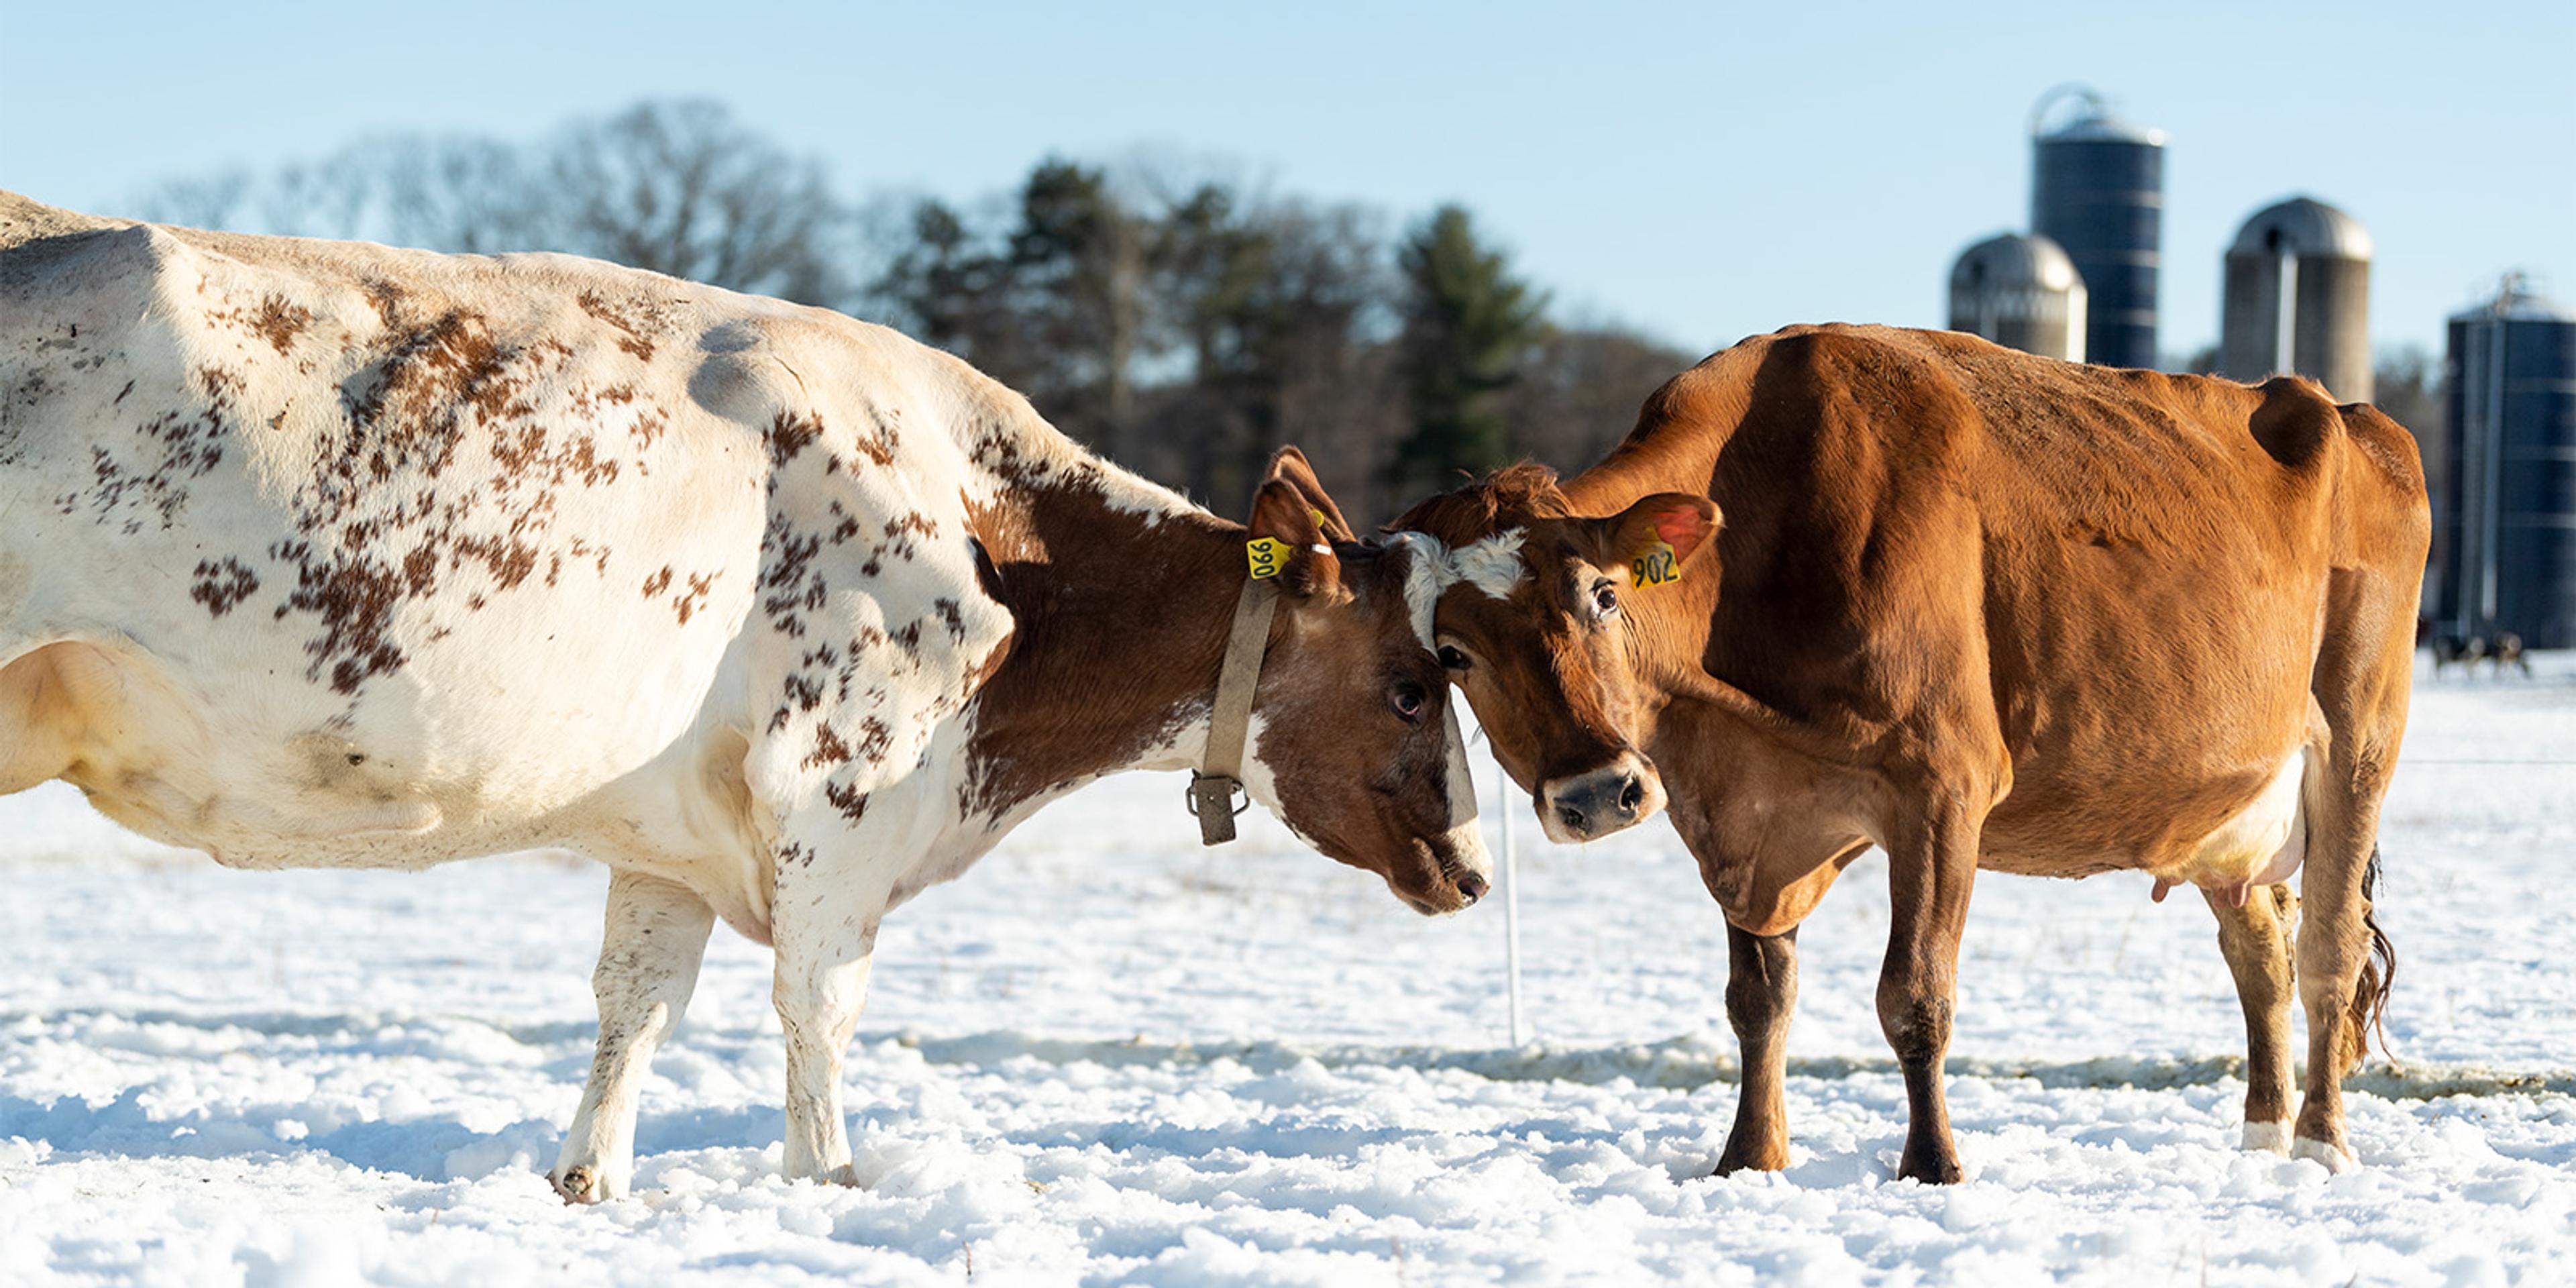 Cows stand in snow.